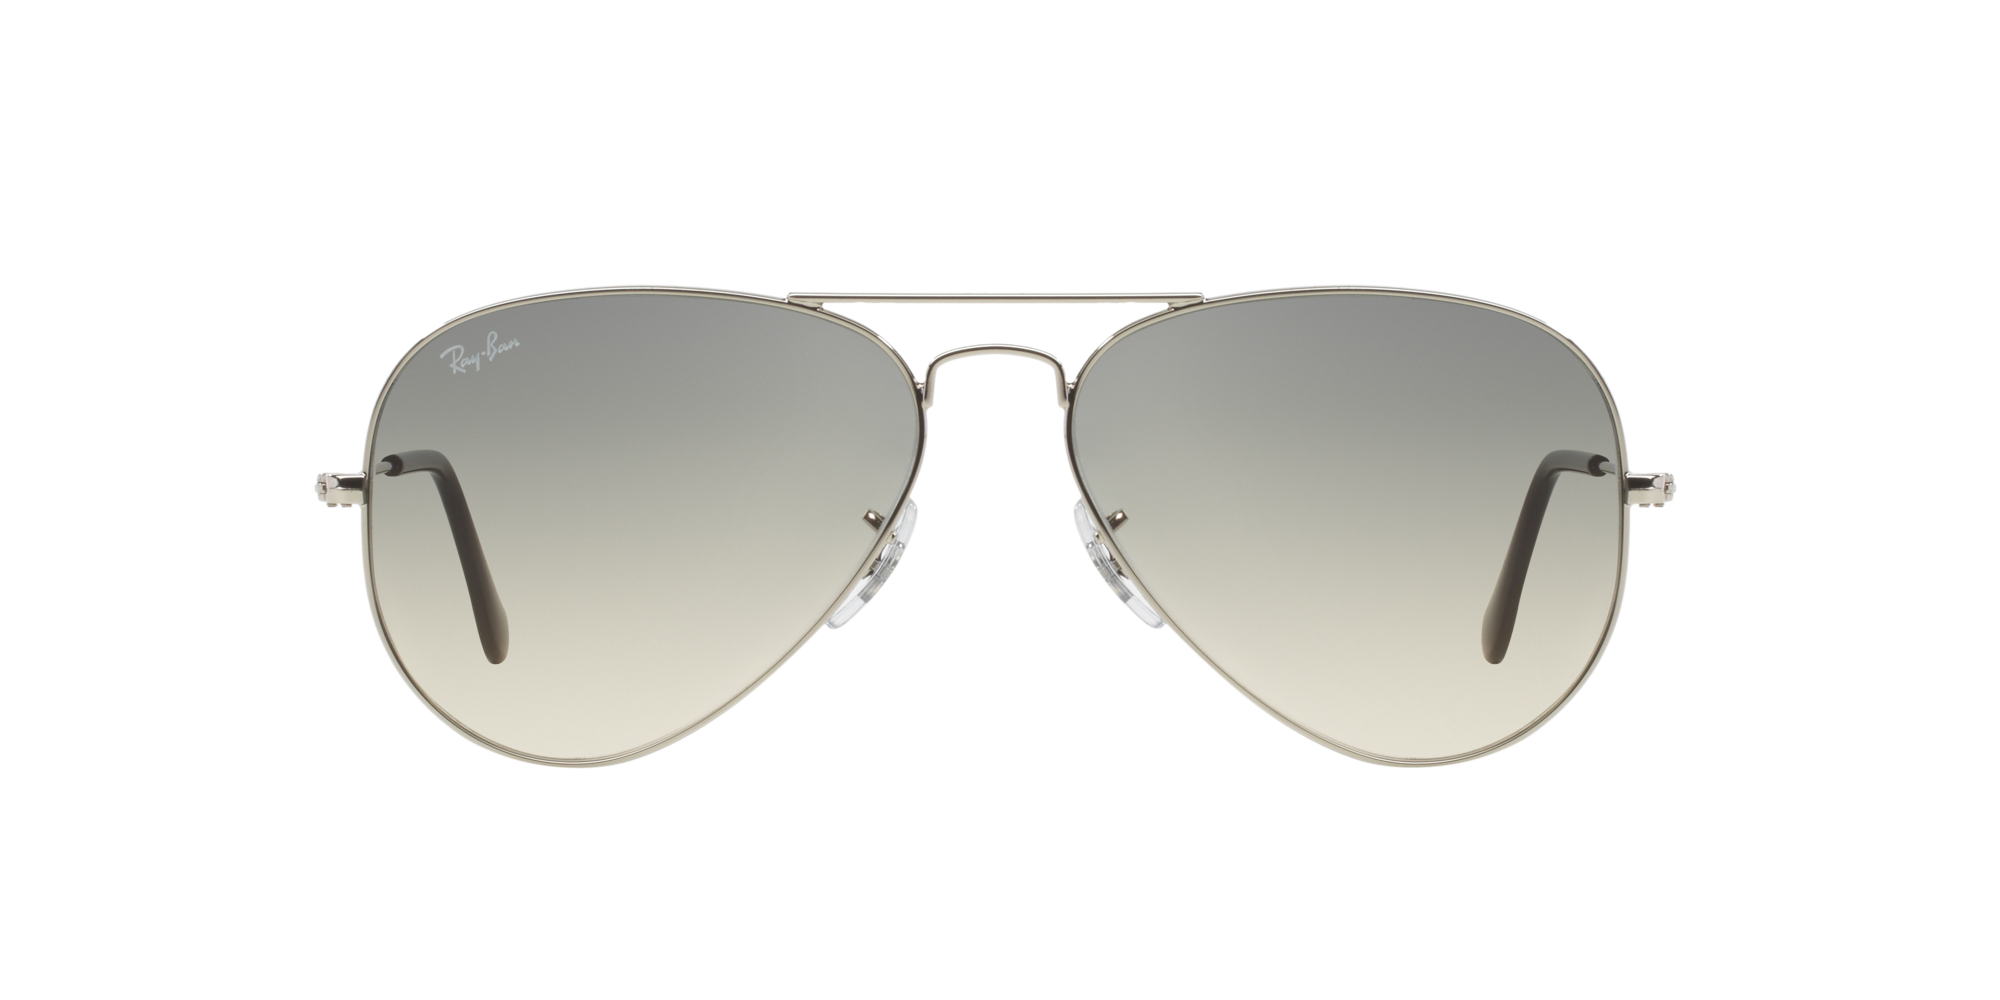 Ray Ban RB3025 003/32 Silver/ Gray Gradient Aviator